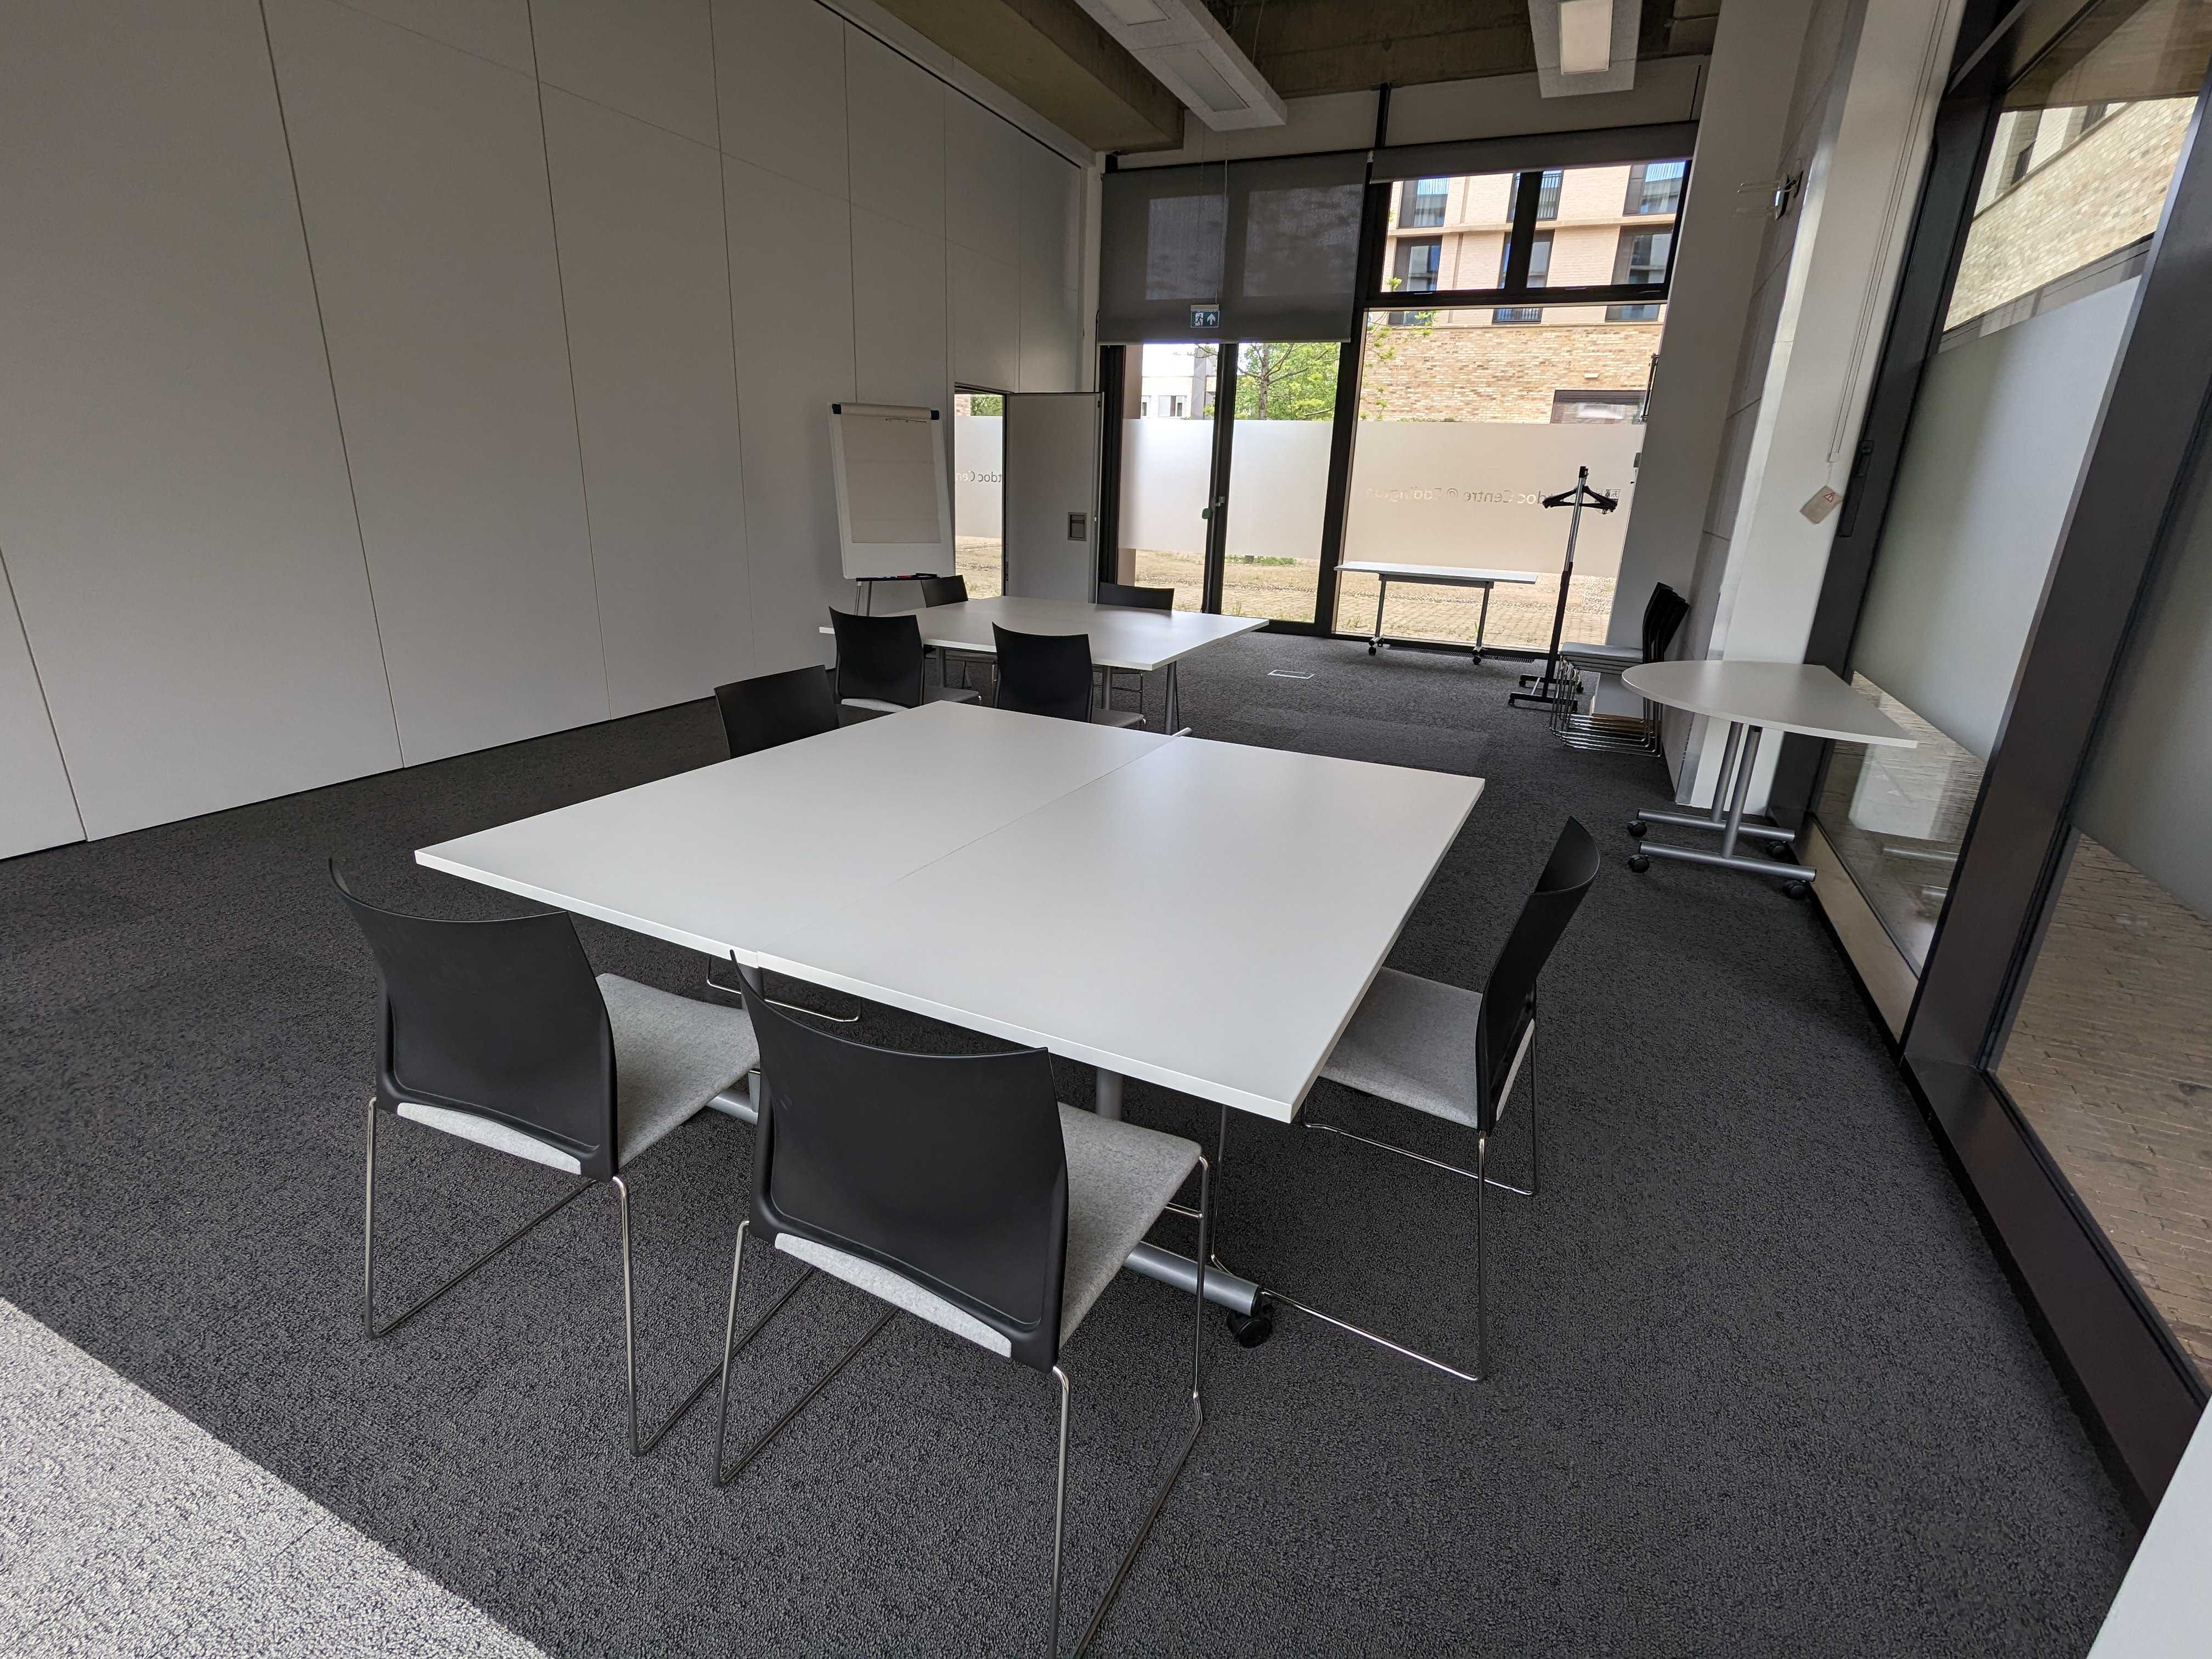 Photograph showing the workshop-style layout of the Multi-Function Space - a room with eight chairs arranged around two tables.